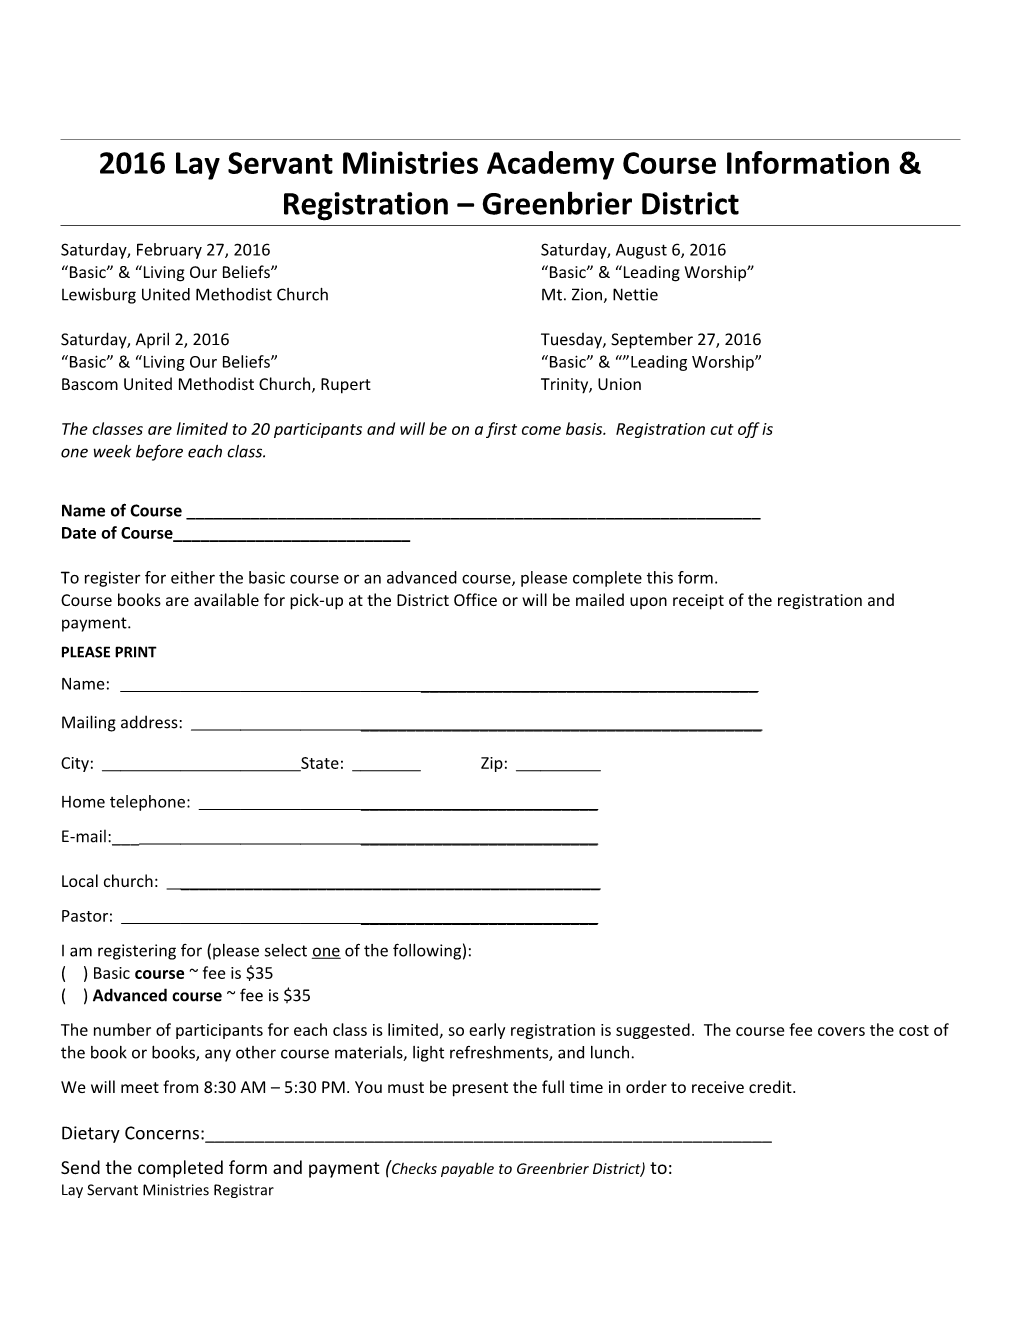 2016 Lay Servant Ministries Academy Course Information & Registration Greenbrier District